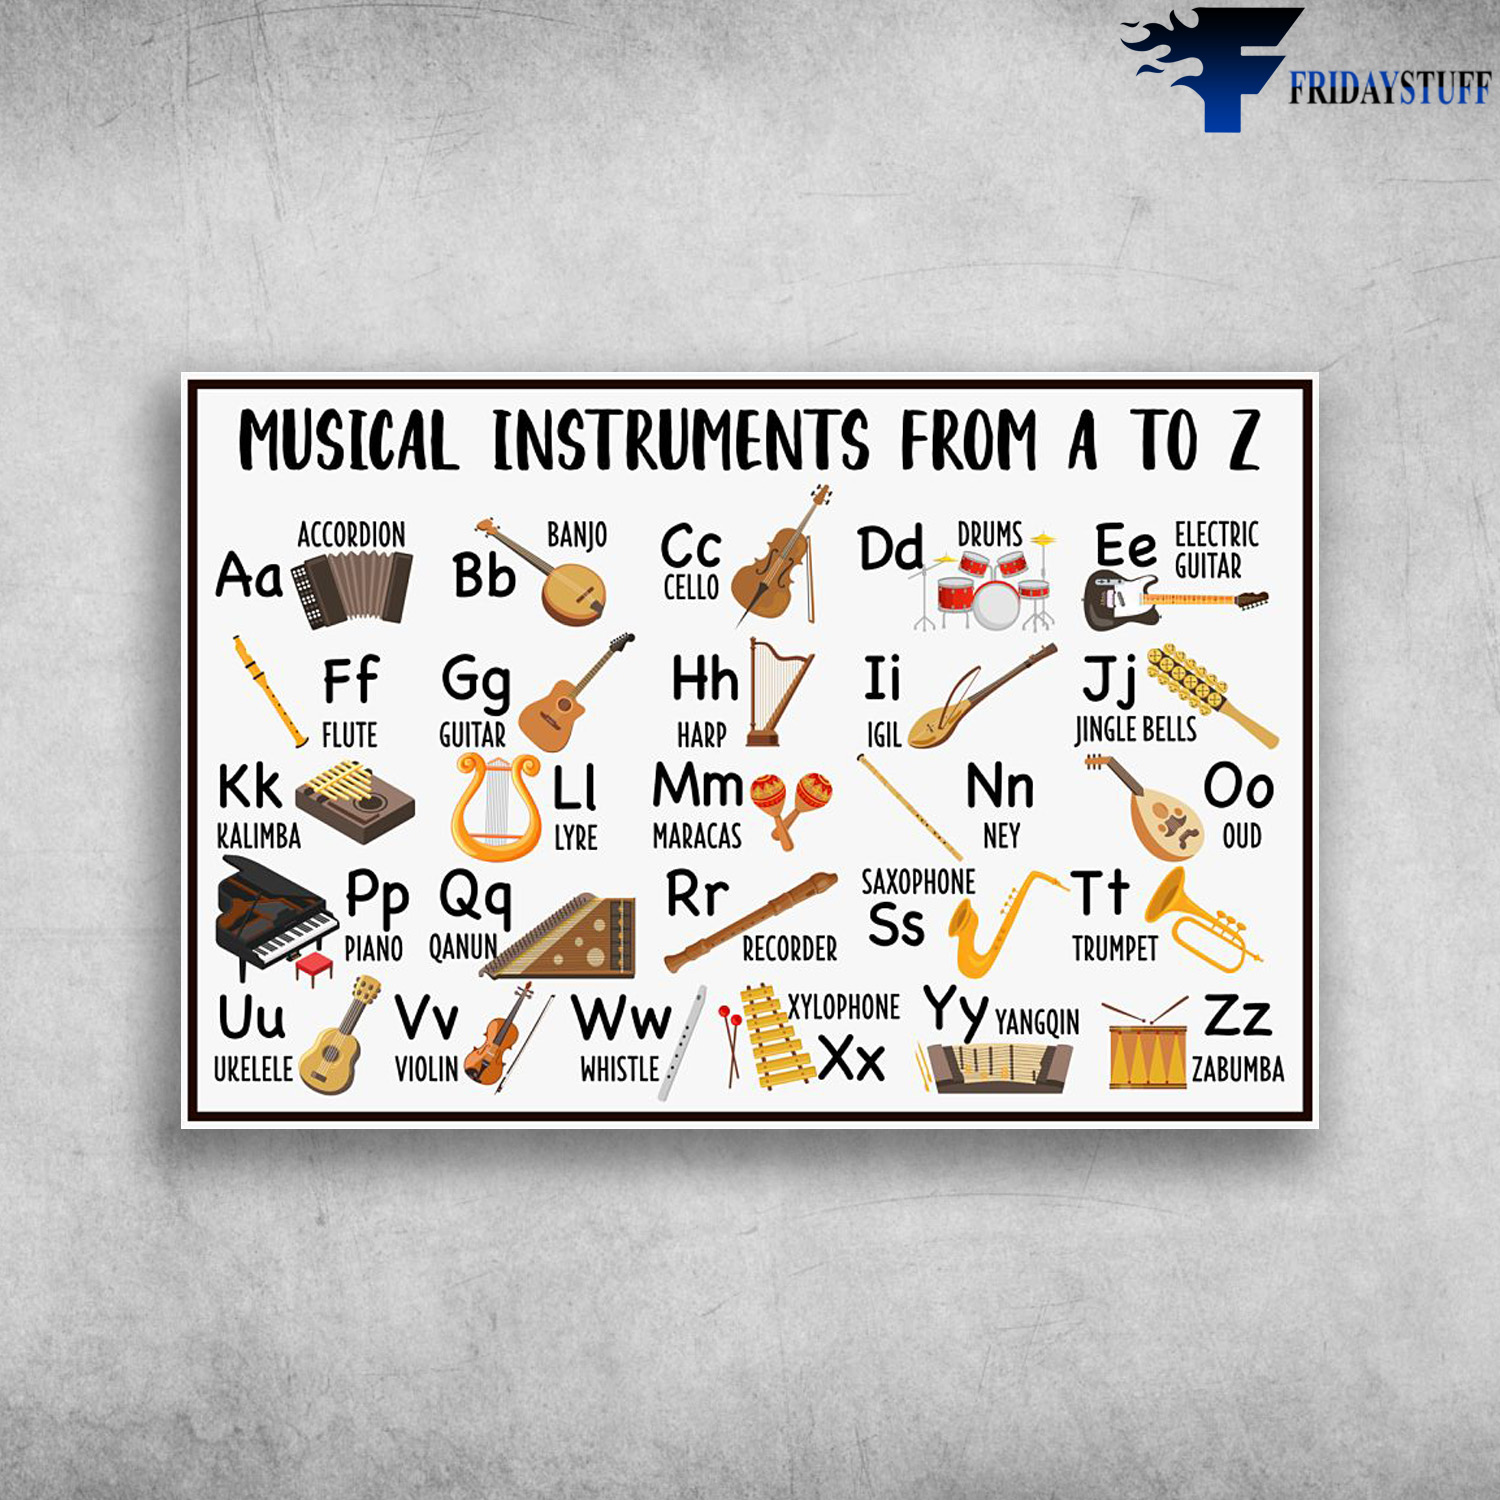 Musical Instruments From A To Z - Accordion, Manjo, Cello, Drums, Electric Guitar, Flute, Guitar, Harp, Igil, Jingle Bells